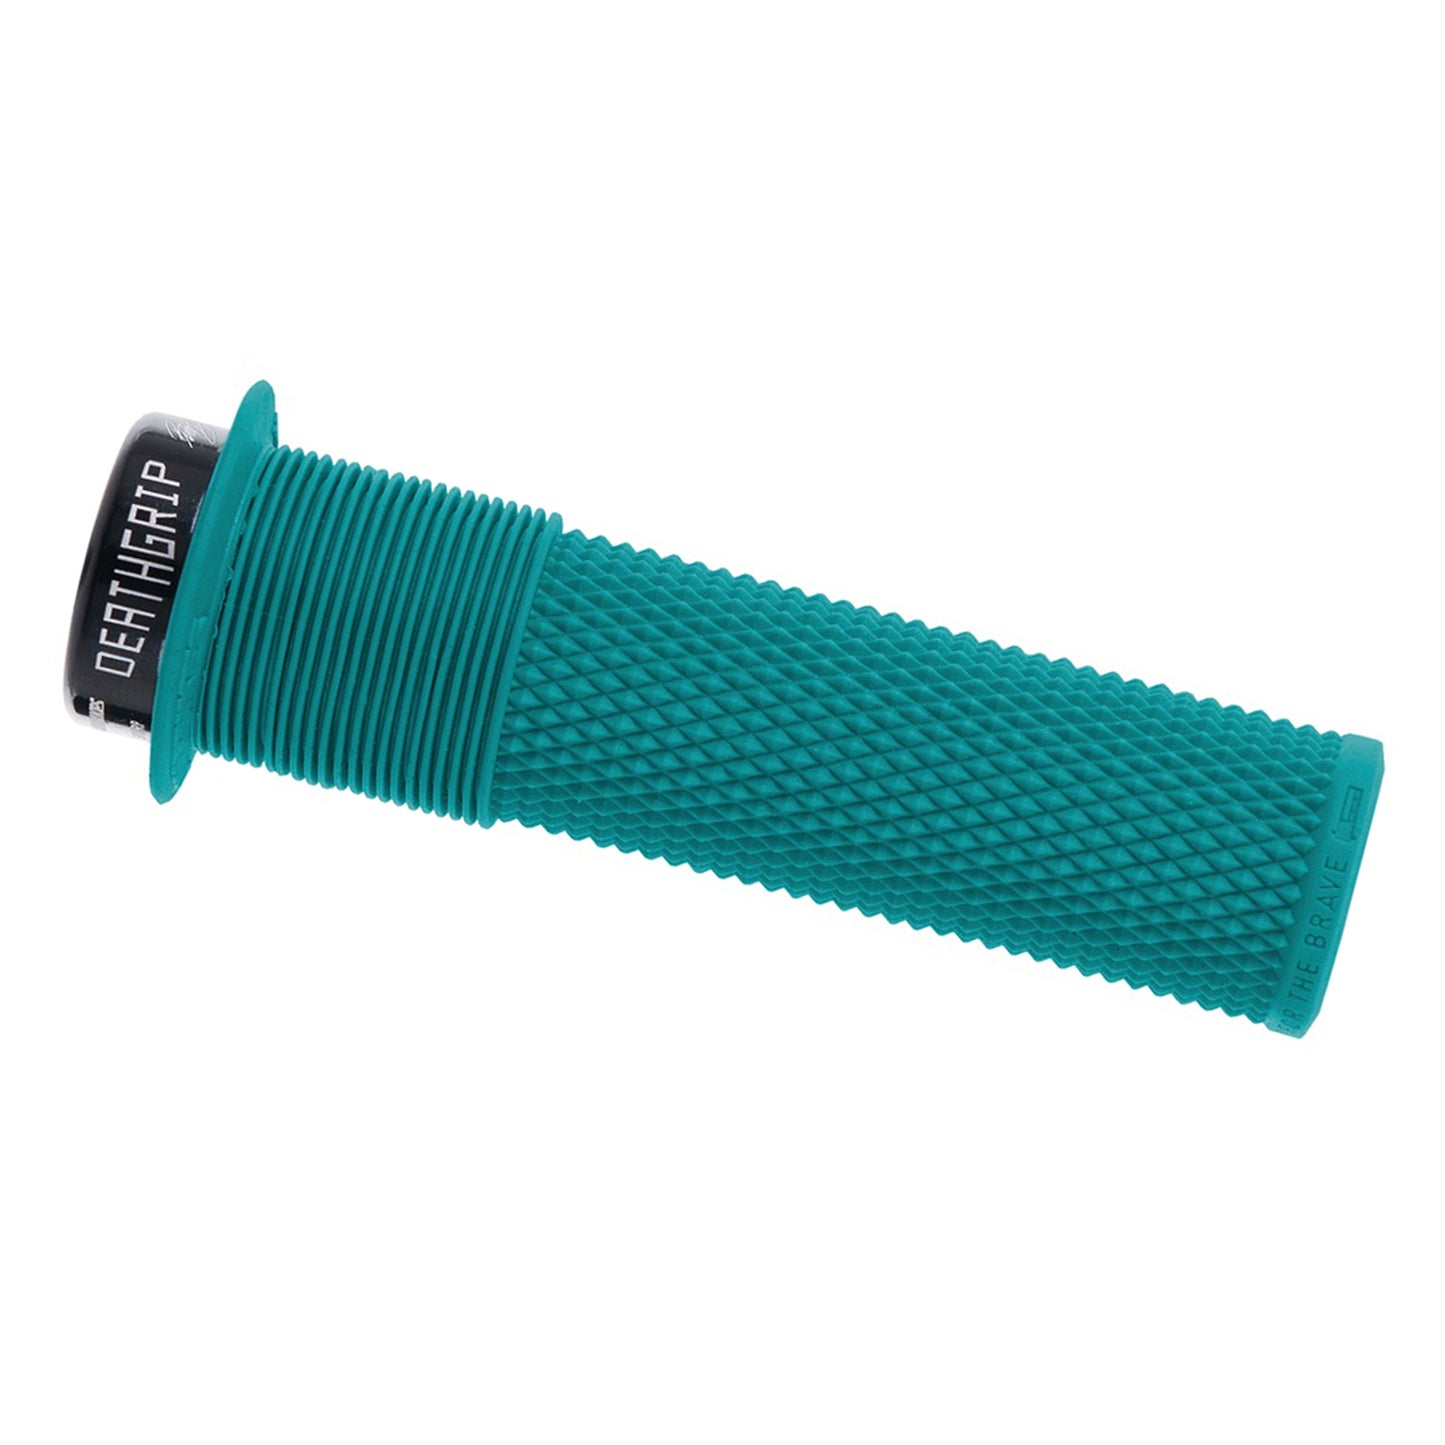 DMR Brendog Flanged DeathGrip Thick - Turquoise